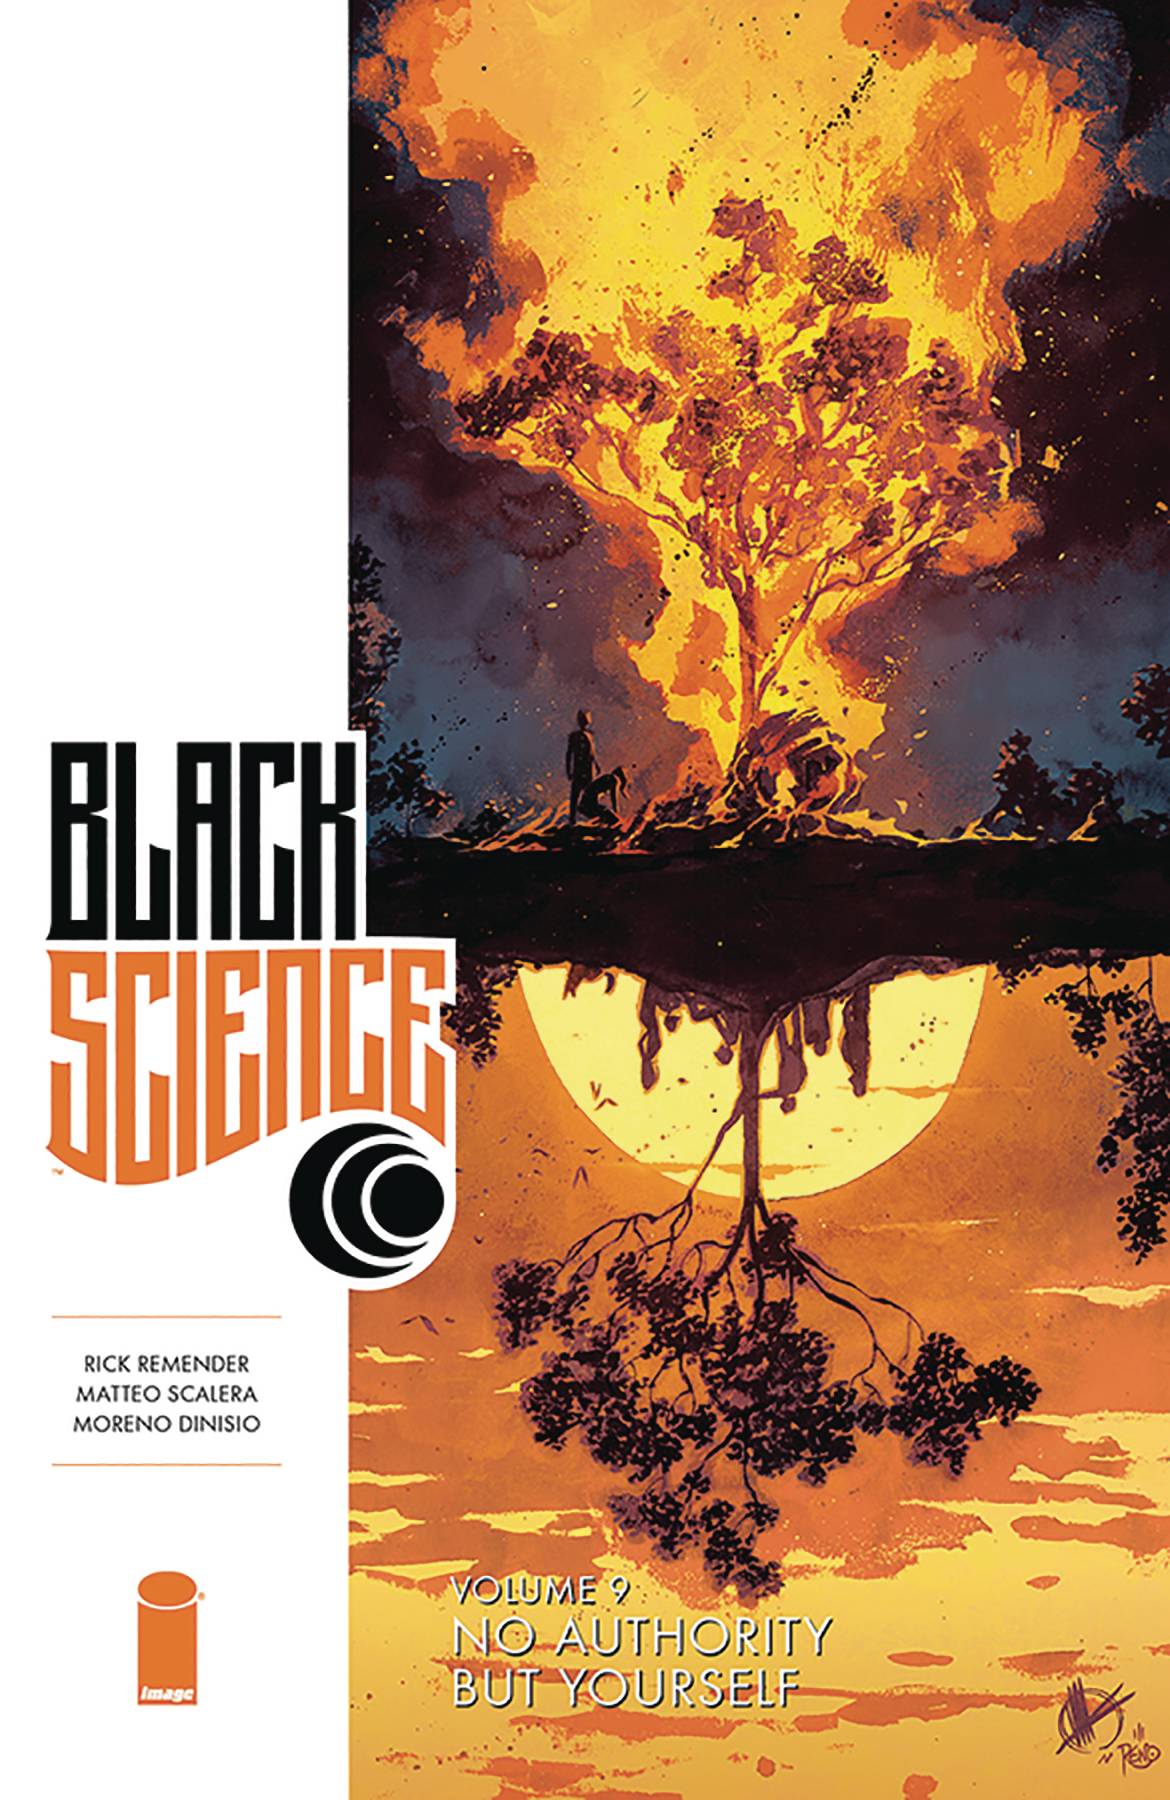 BLACK SCIENCE TP VOL 09 NO AUTHORITY BUT YOURSELF (JUL190099